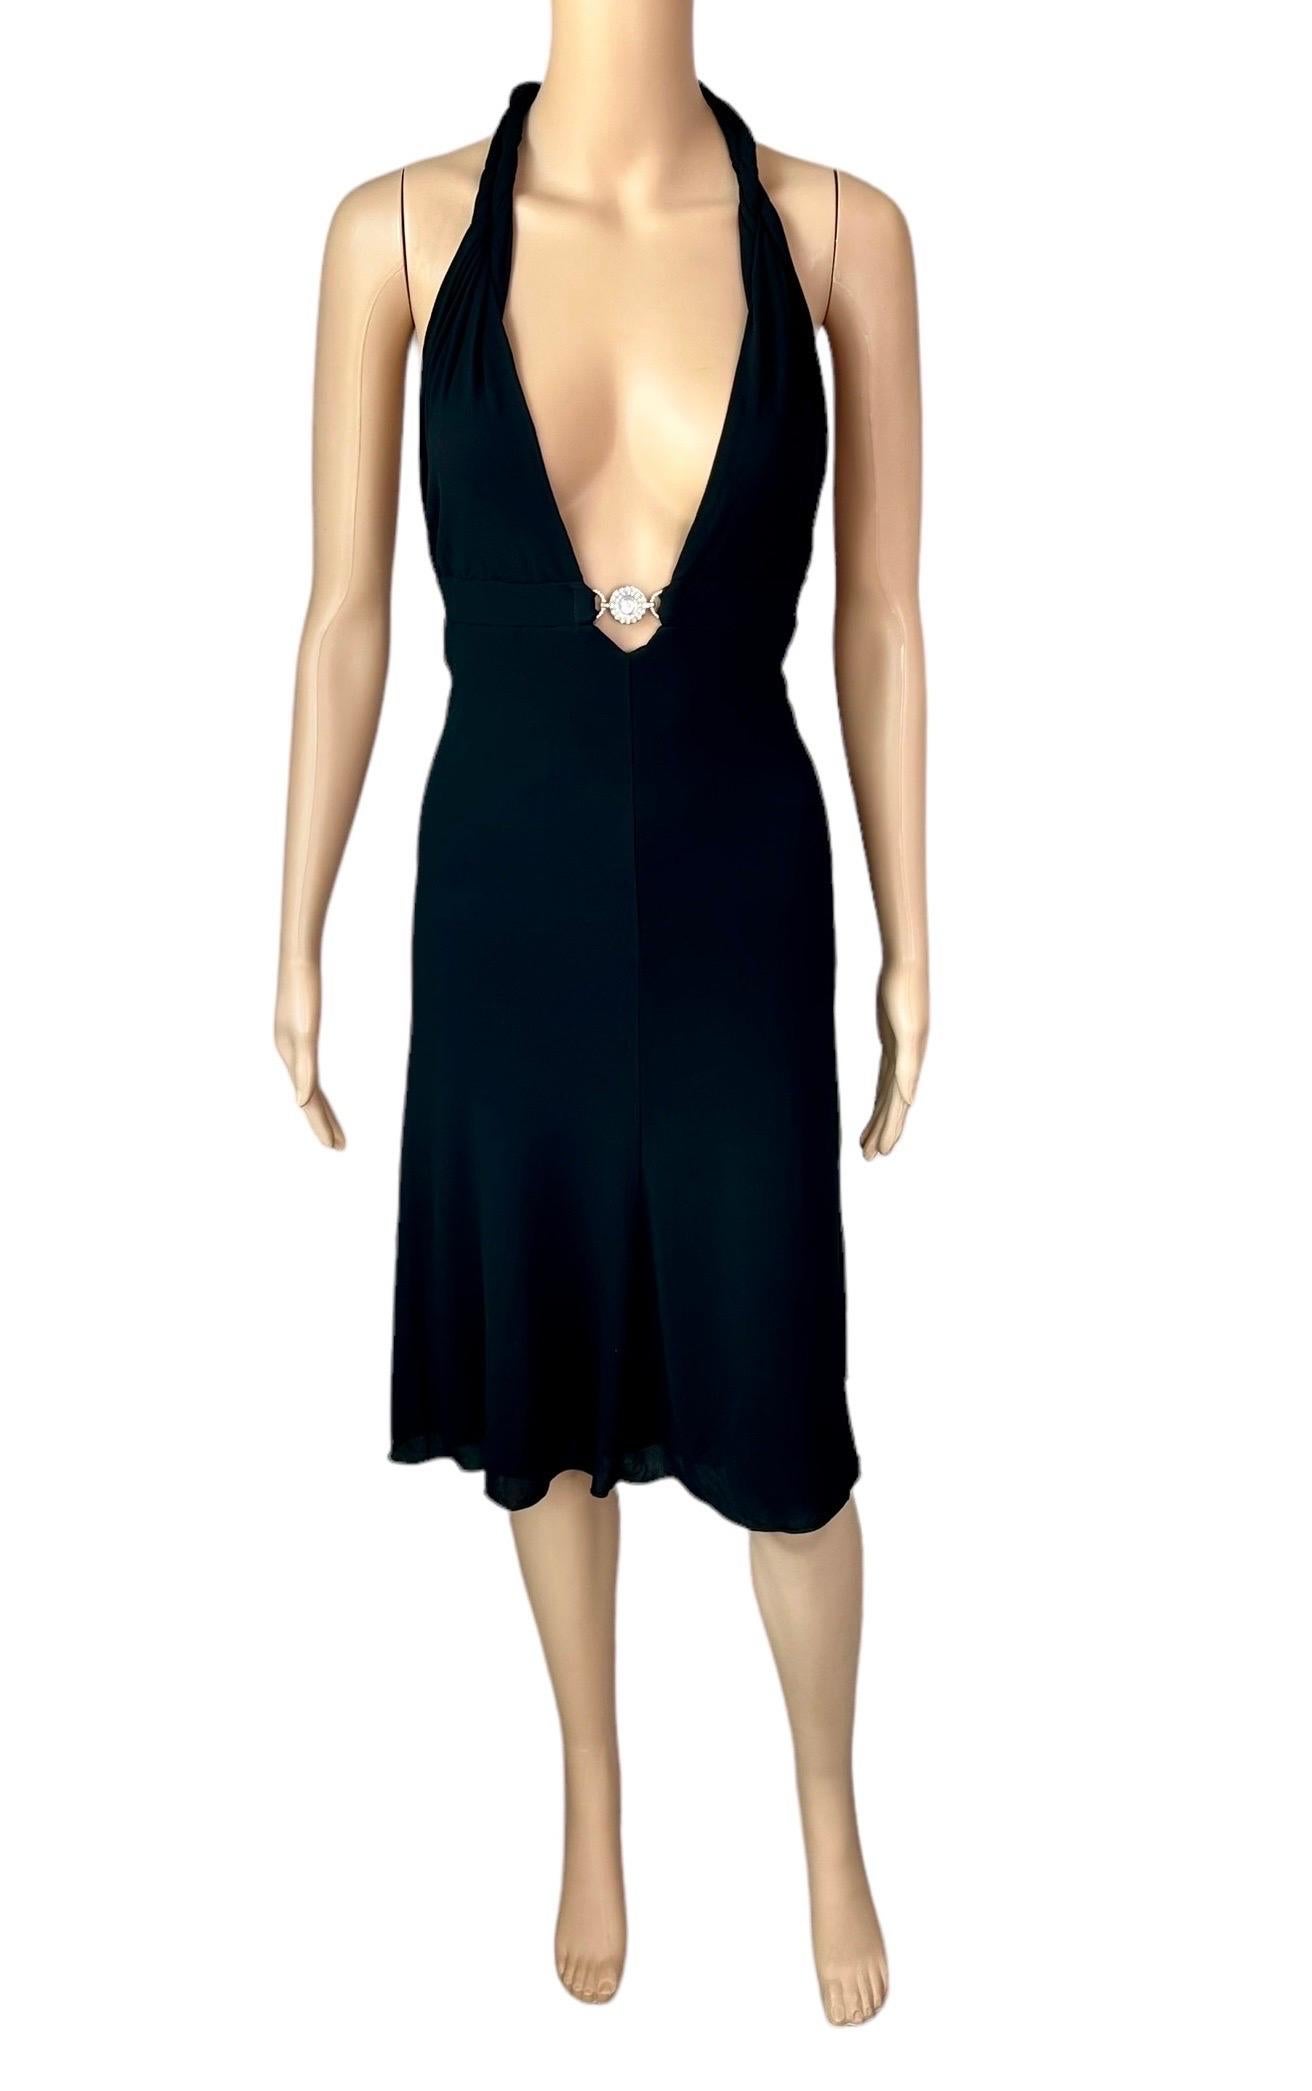 Versace S/S 2007 Crystal Logo Plunging Neckline Backless Halter Black Dress IT 40

Versace black halter dress featuring silver-tone crystal embellished Versace medusa logo, plunging neckline, and open back.

Condition: New with Tags

FOLLOW US ON